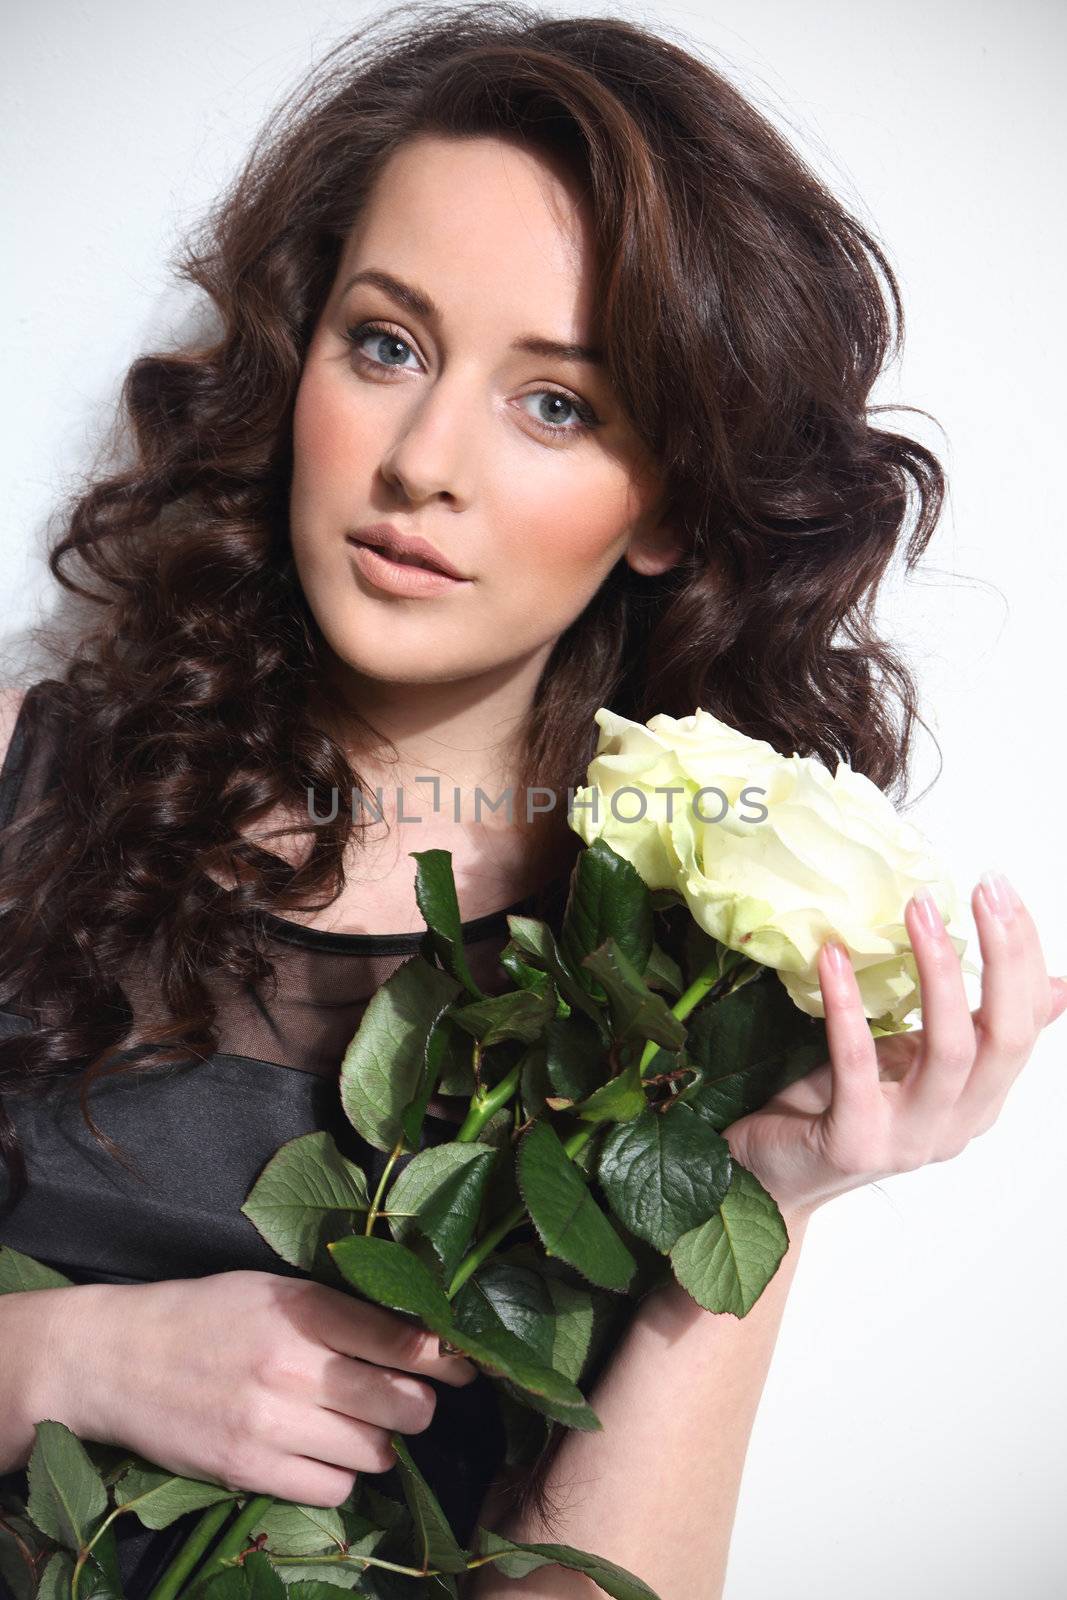 Photo of beautiful woman with white roses by robert_przybysz